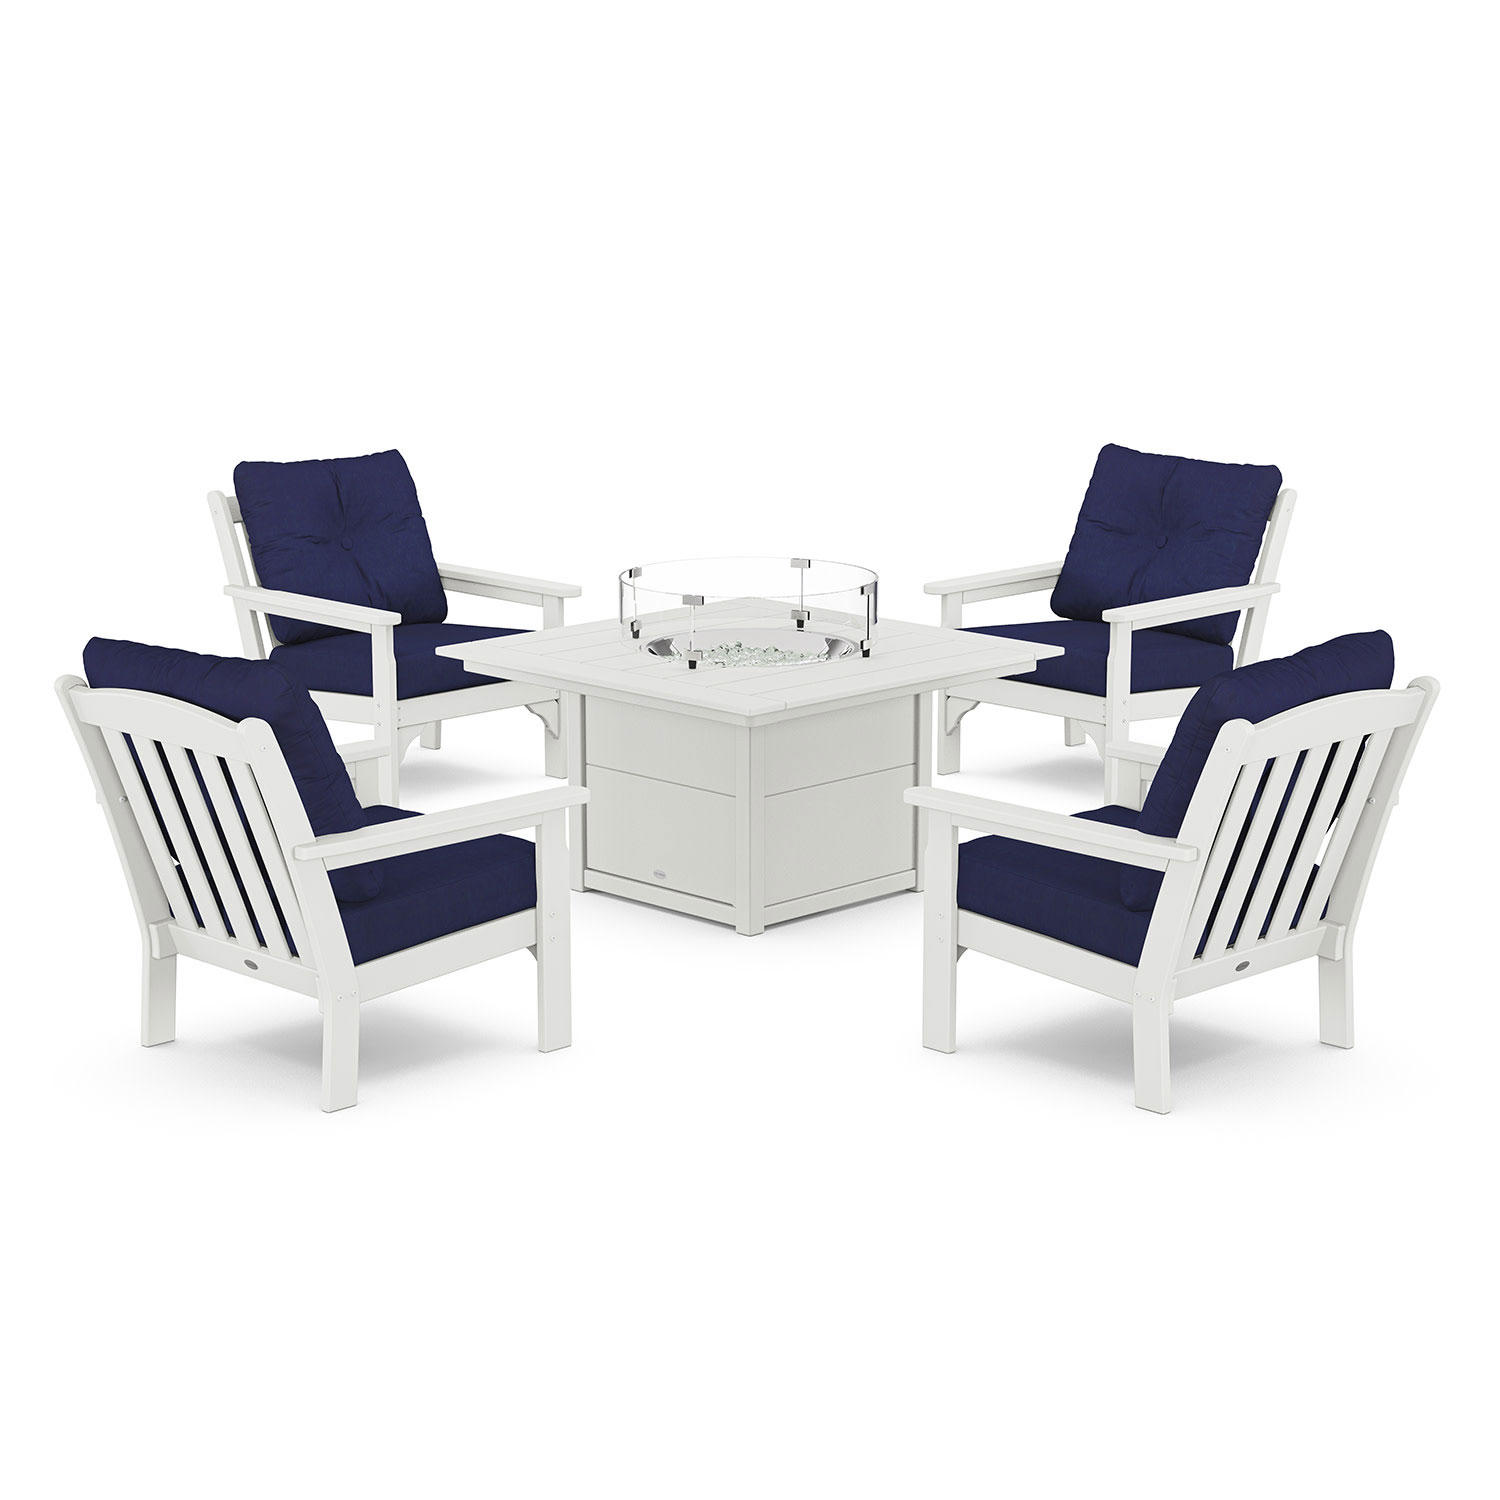 POLYWOOD Gulf Shores 5-Piece Deep Seating Firepit Set (White/Navy)